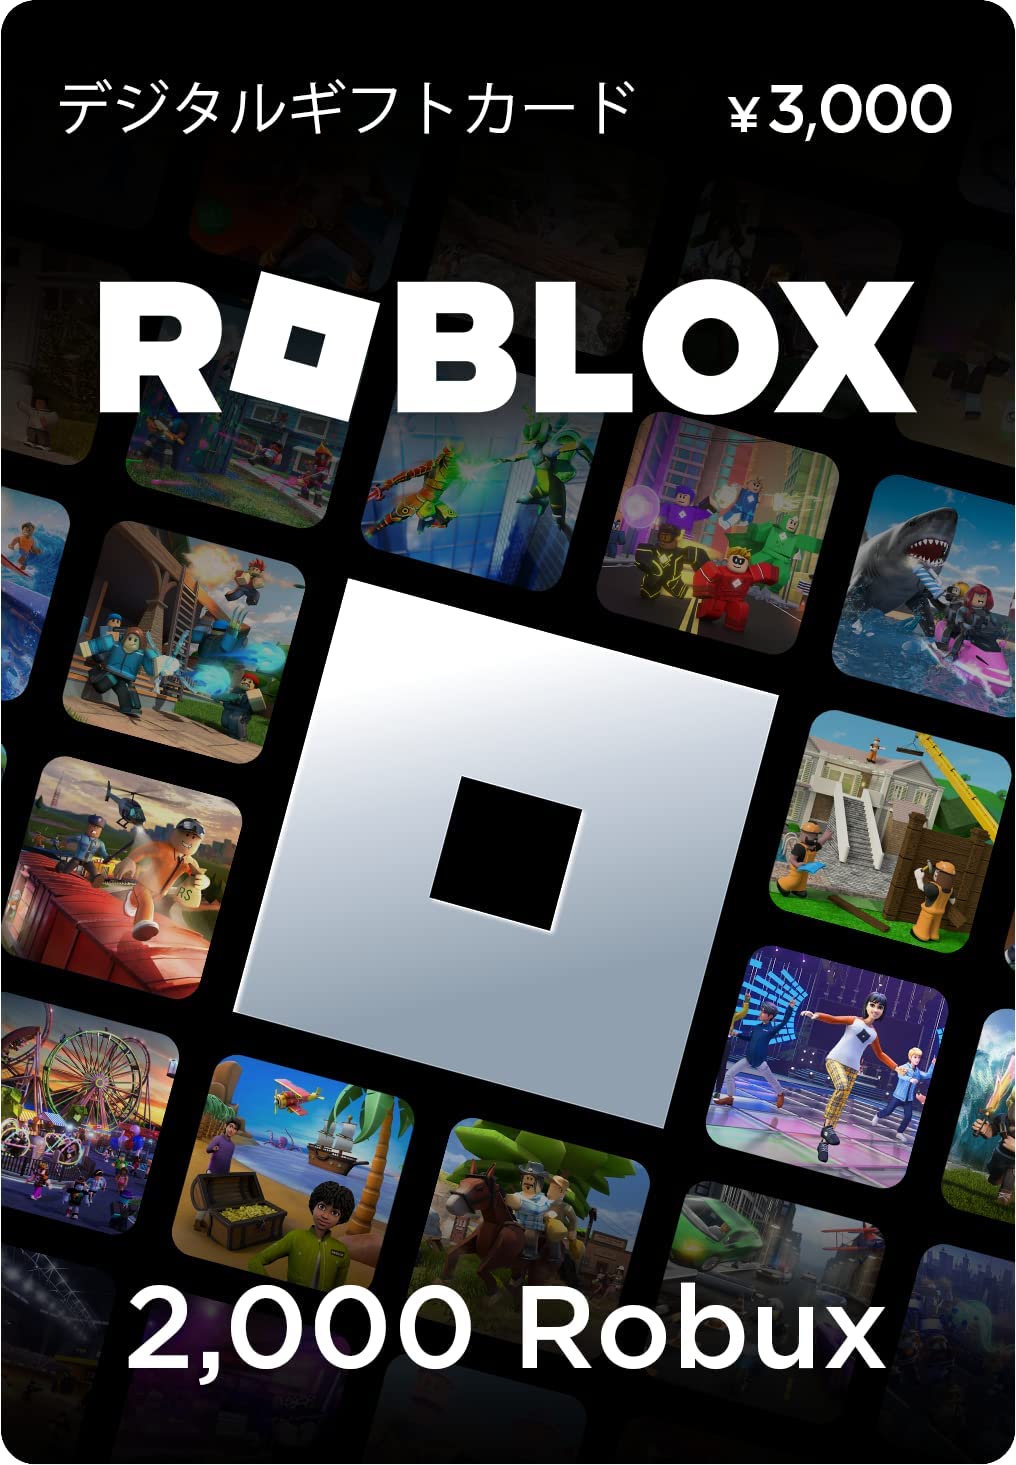 BLACKHAWK NETWORK JAPAN PARTNERS WITH ROBLOX GODO KAISHA TO RELEASE ROBLOX  GIFT CARDS AT LAWSON RETAIL OUTLETS IN JAPAN